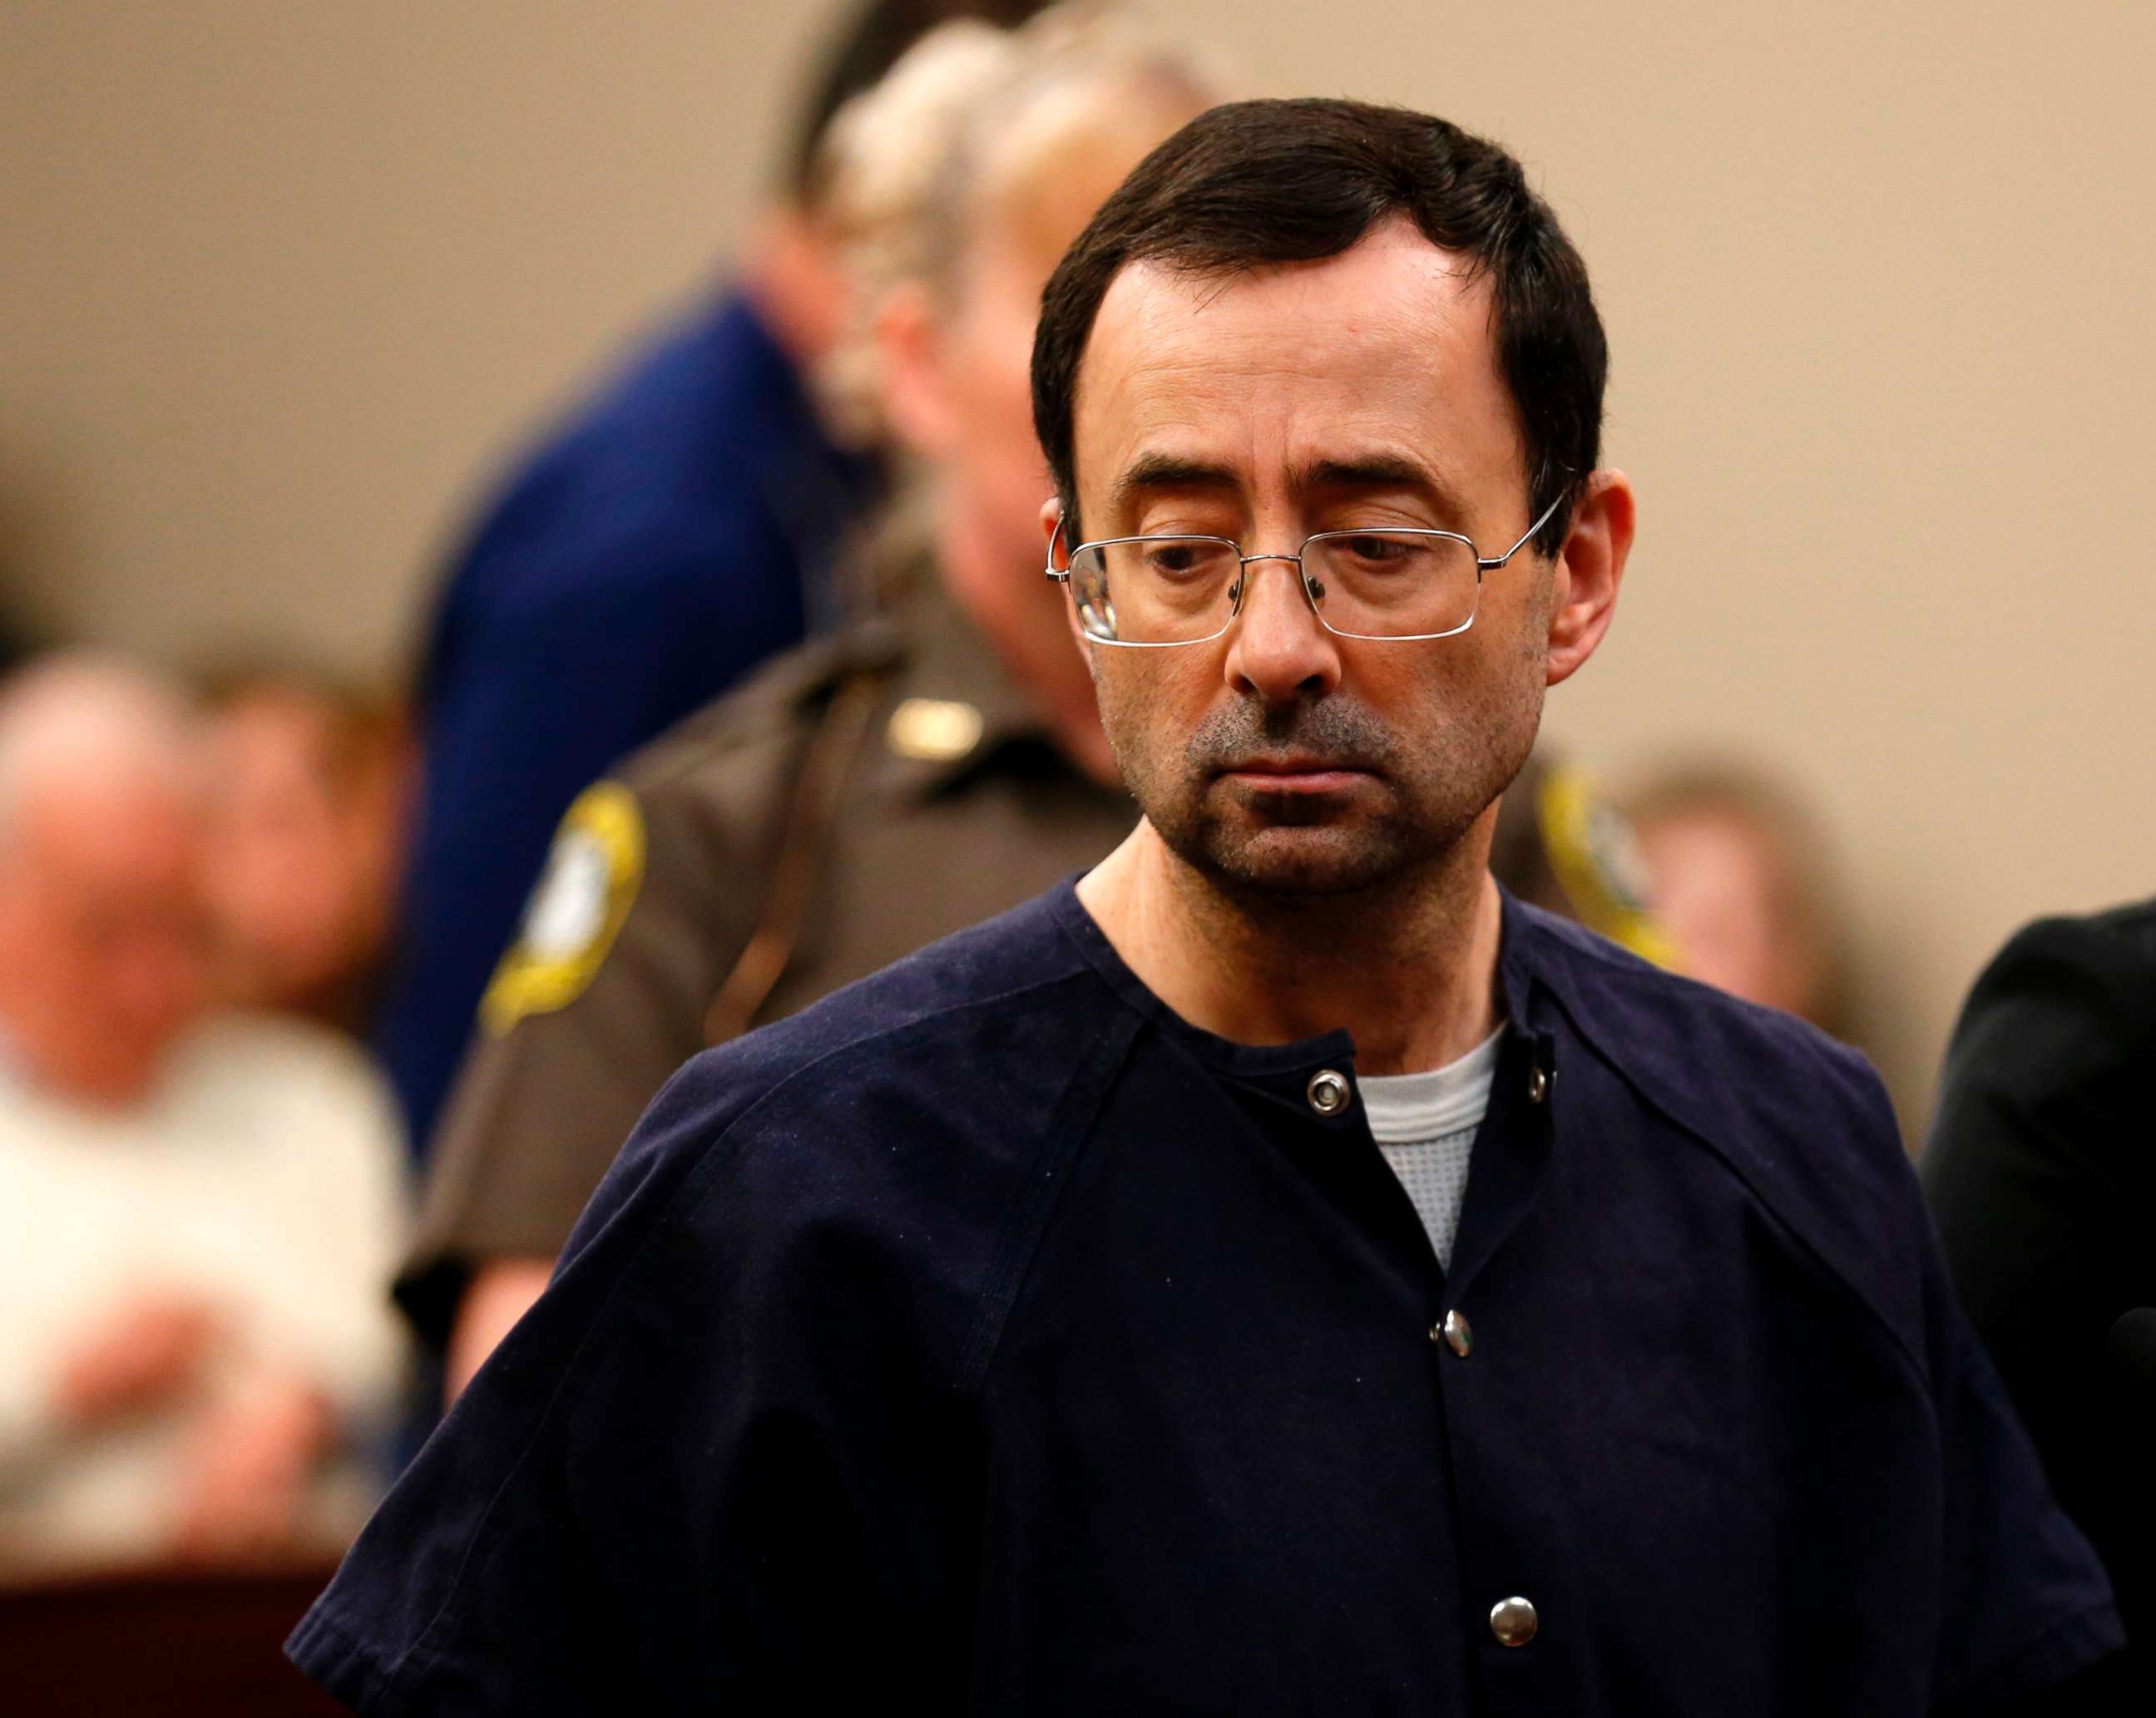 PHOTO: Former Michigan State University and USA Gymnastics doctor Larry Nassar addresses the court during the sentencing phase in Ingham County Circuit Court on Jan. 24, 2018 in Lansing, Mich.